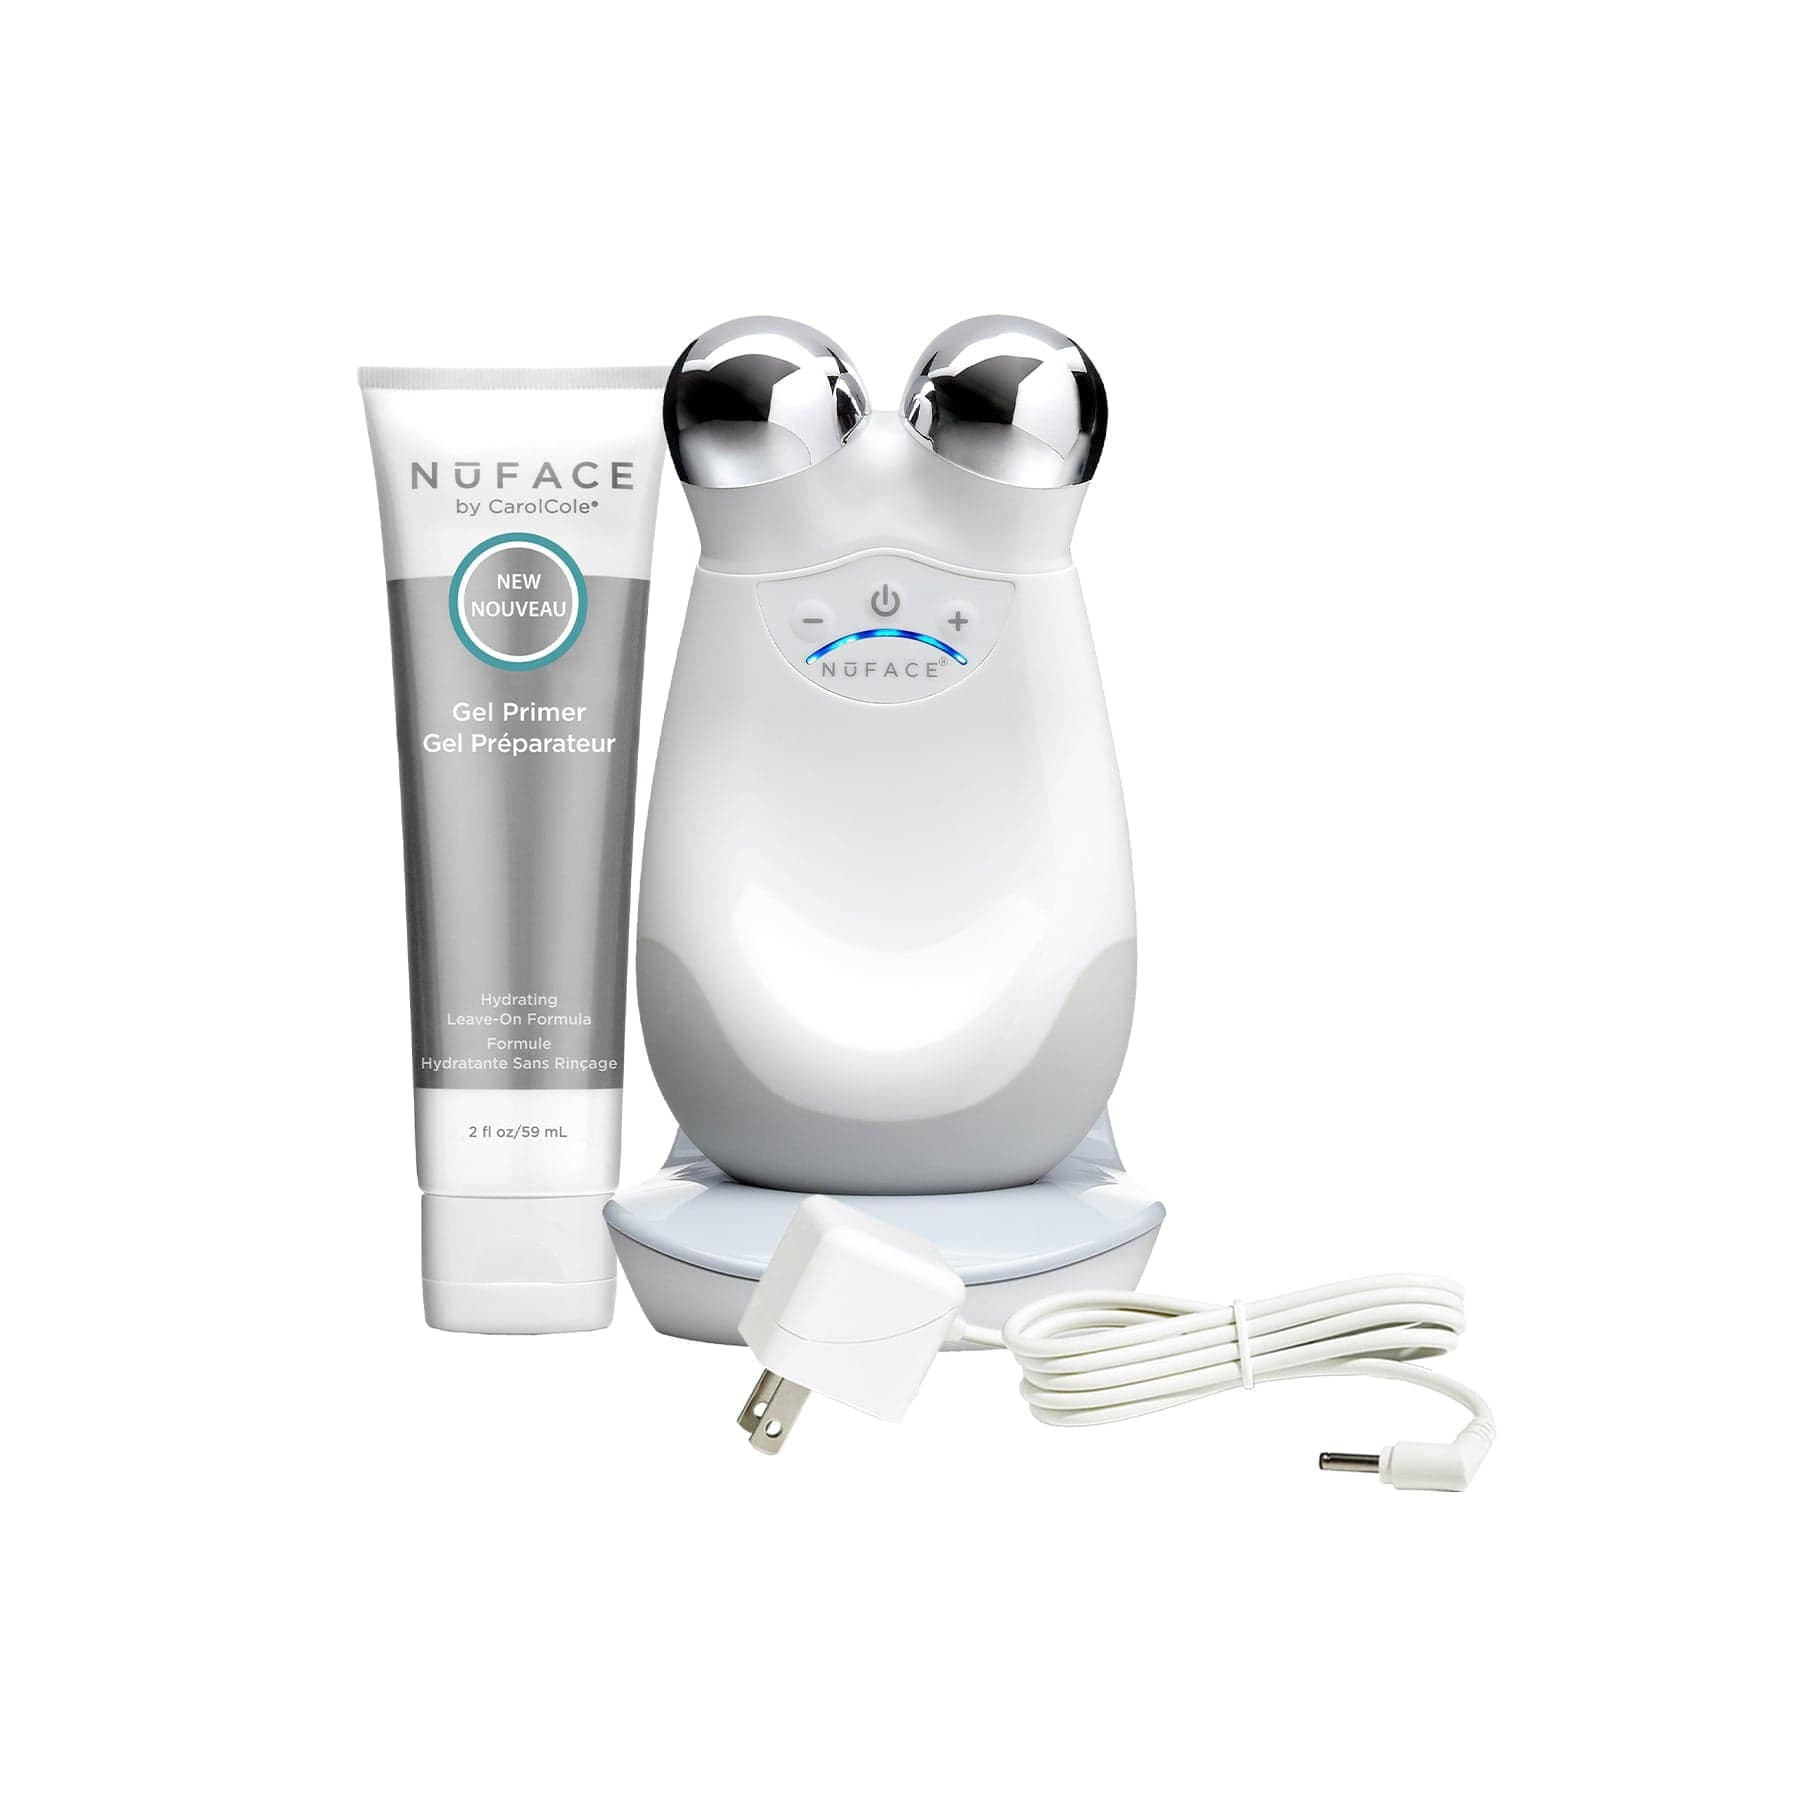 NuFACE Trinity + Wrinkle Reducer Attachment Set